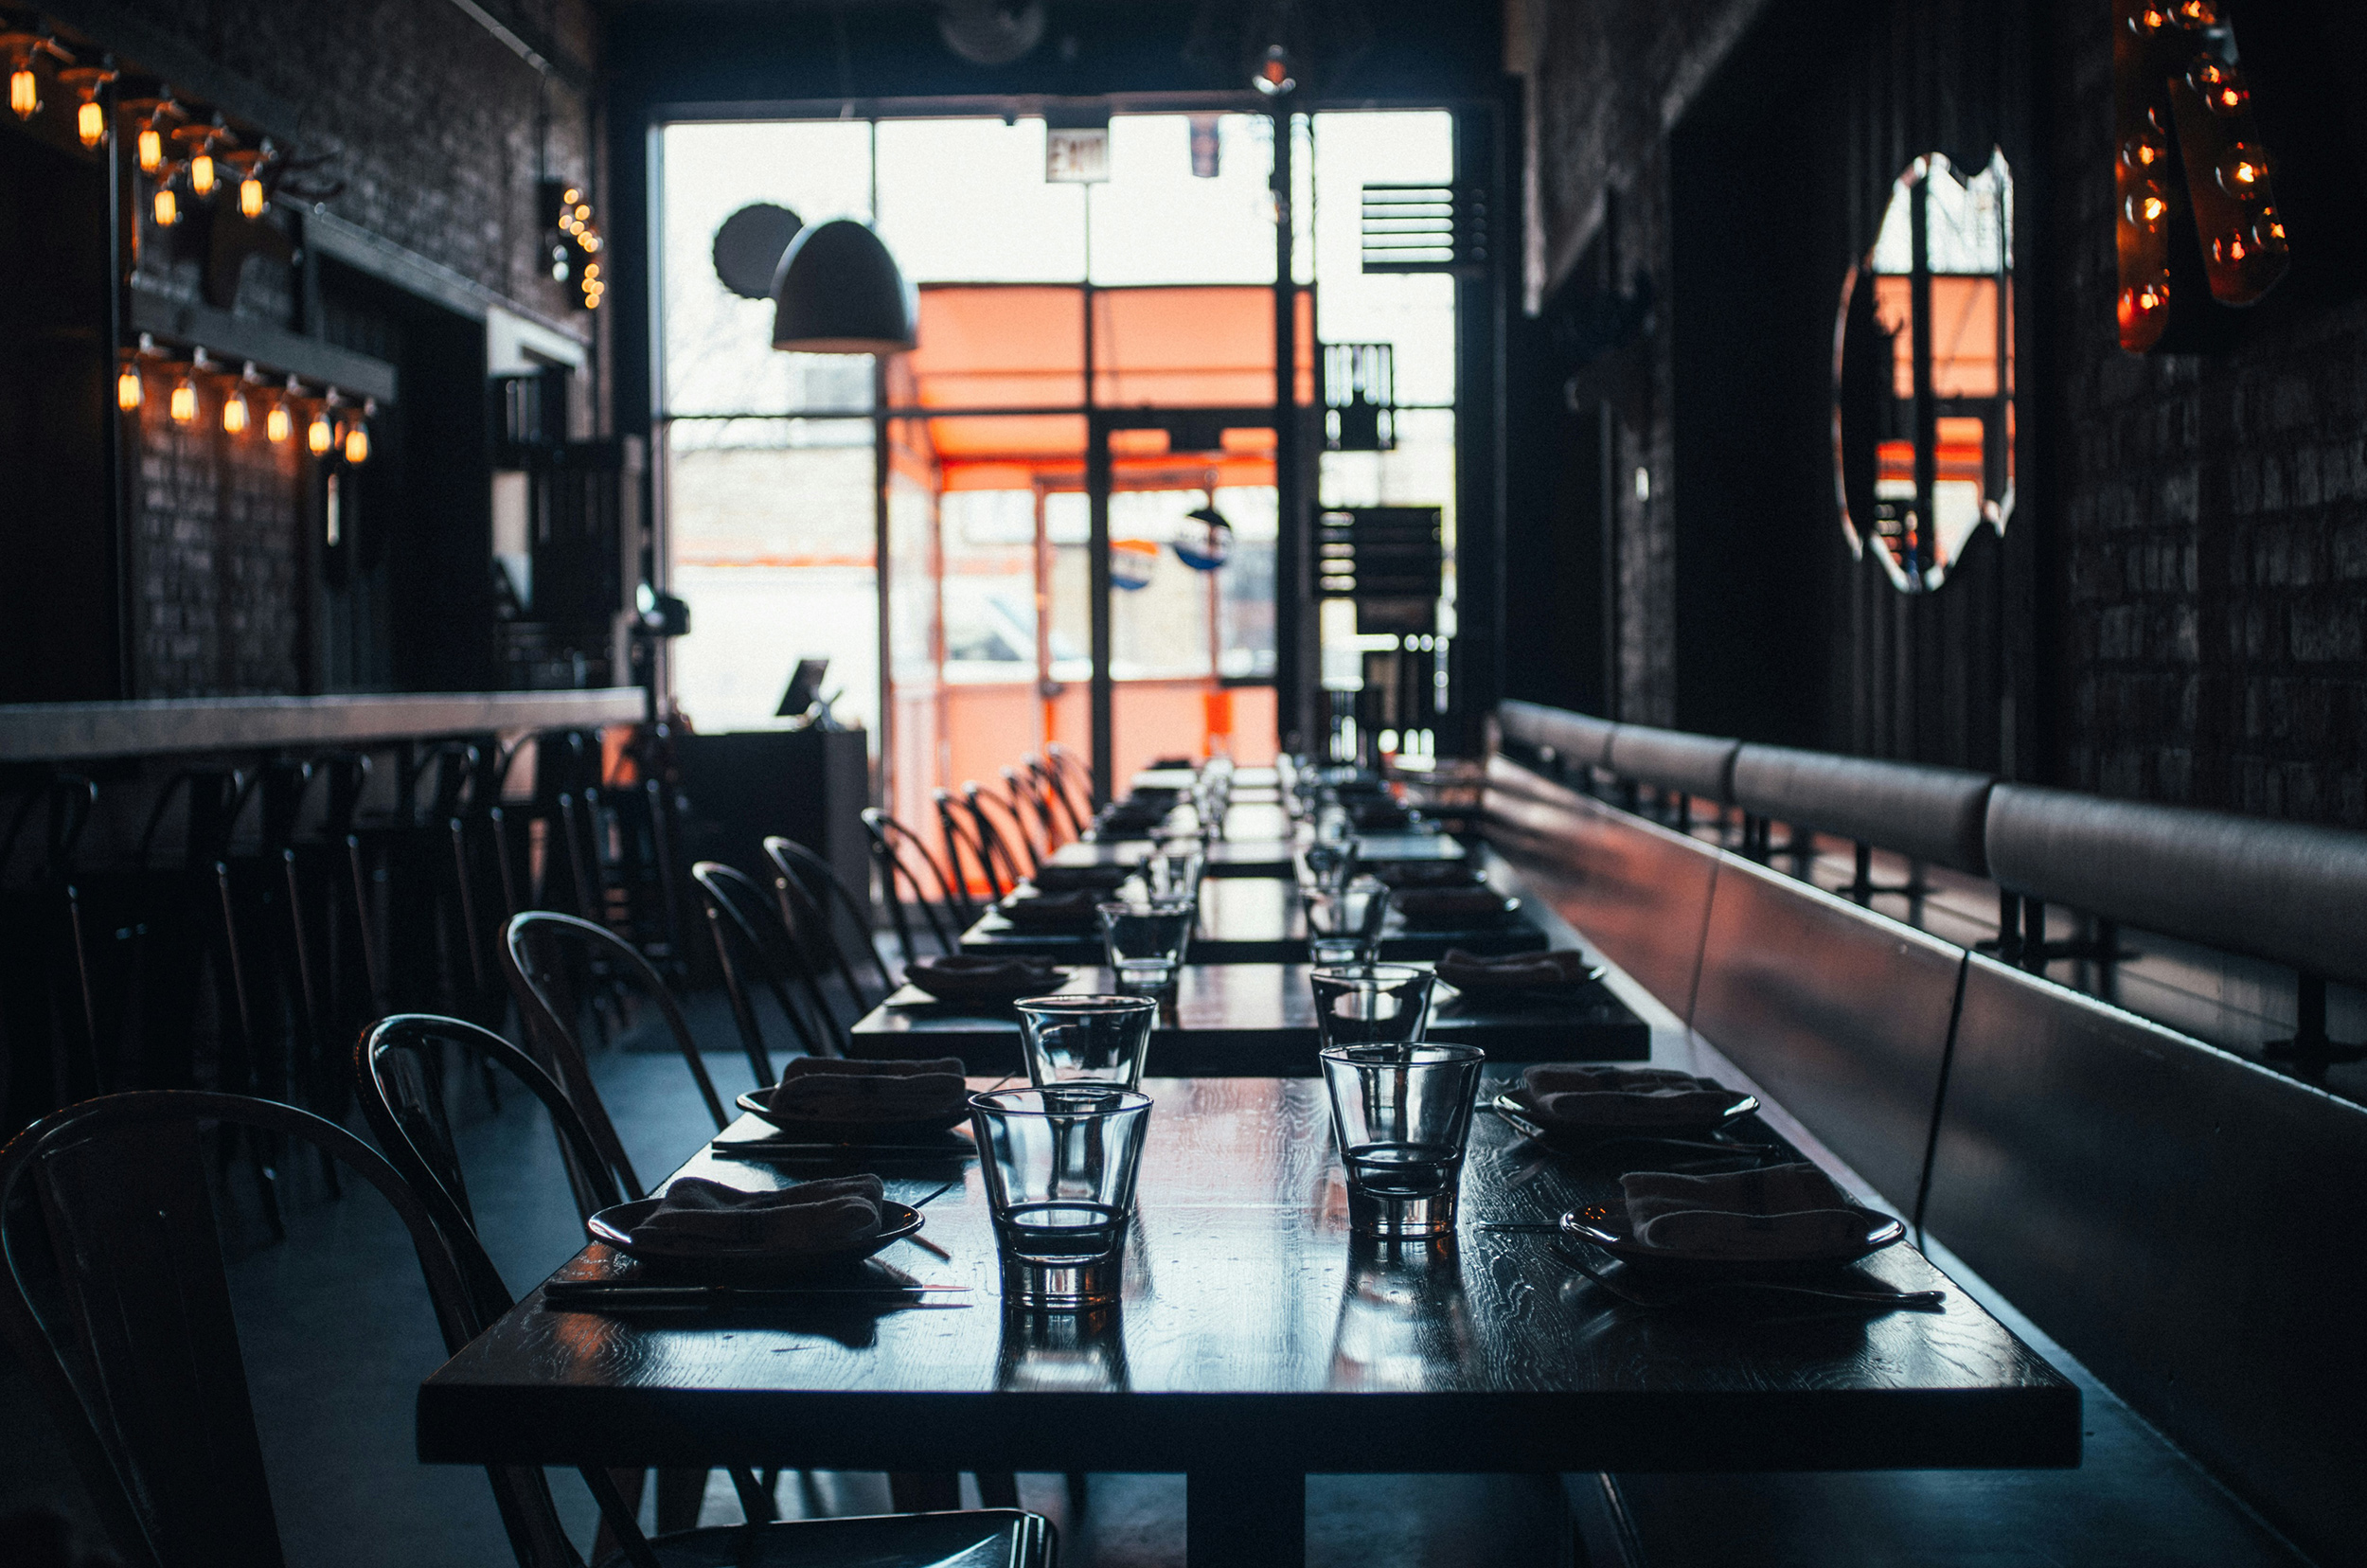 How Much Flatware and Dinnerware Do I Need for My Restaurant? - andrew seaman sQopSb2K0CU unsplash - Eleven36 Blog